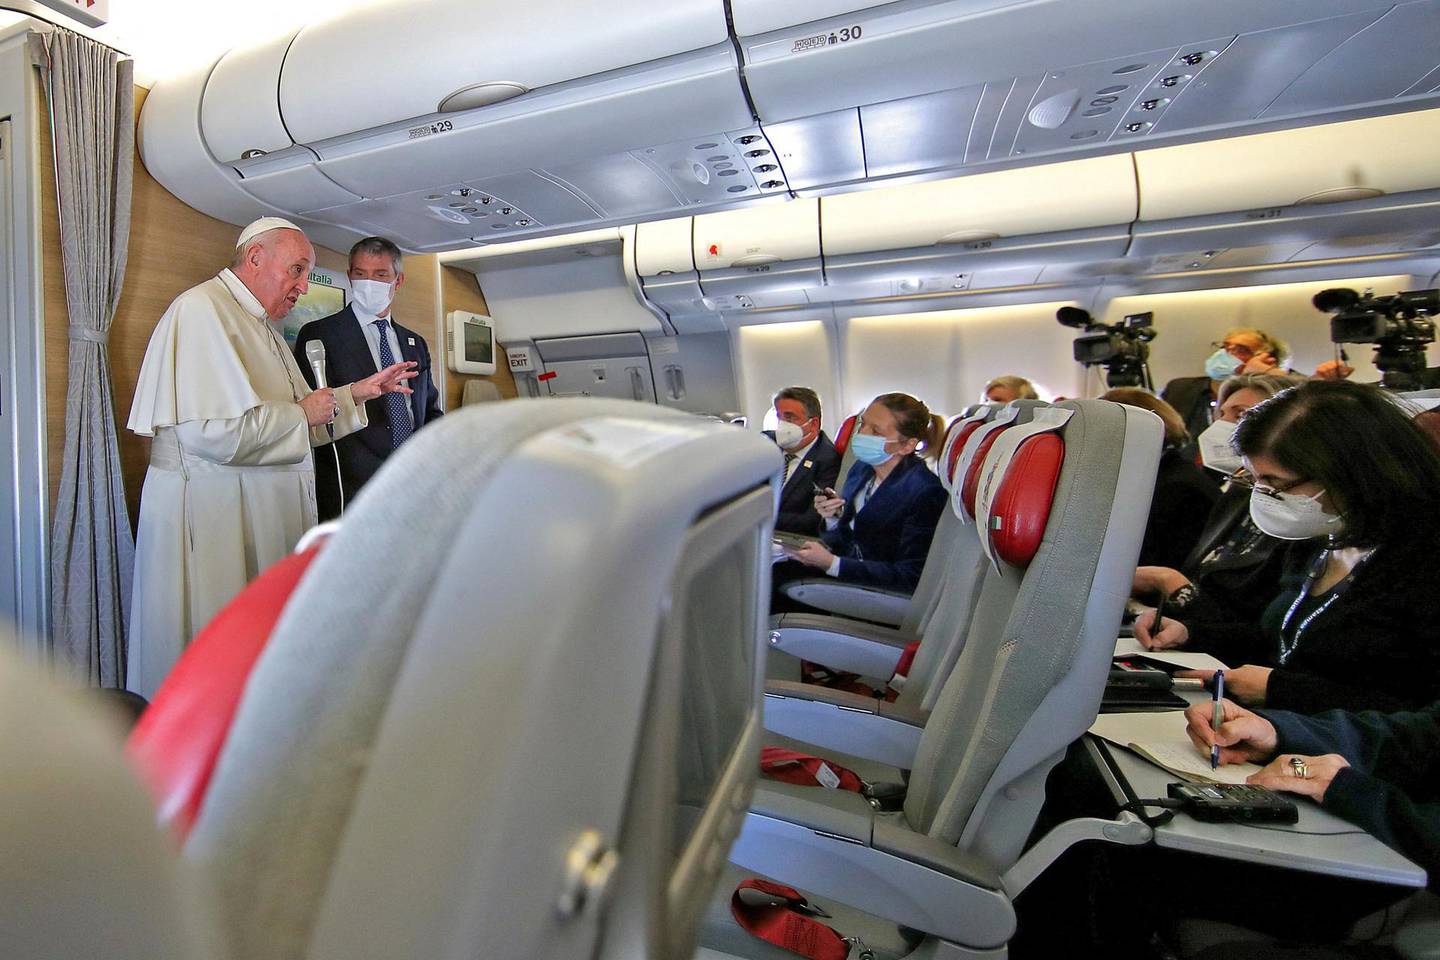 Pope Francis speaks to reporters during a news conference while in the air aboard the Alitalia papal plane on his flight back from Iraq, March 8, 2021.   / AFP / POOL / YARA NARDI
